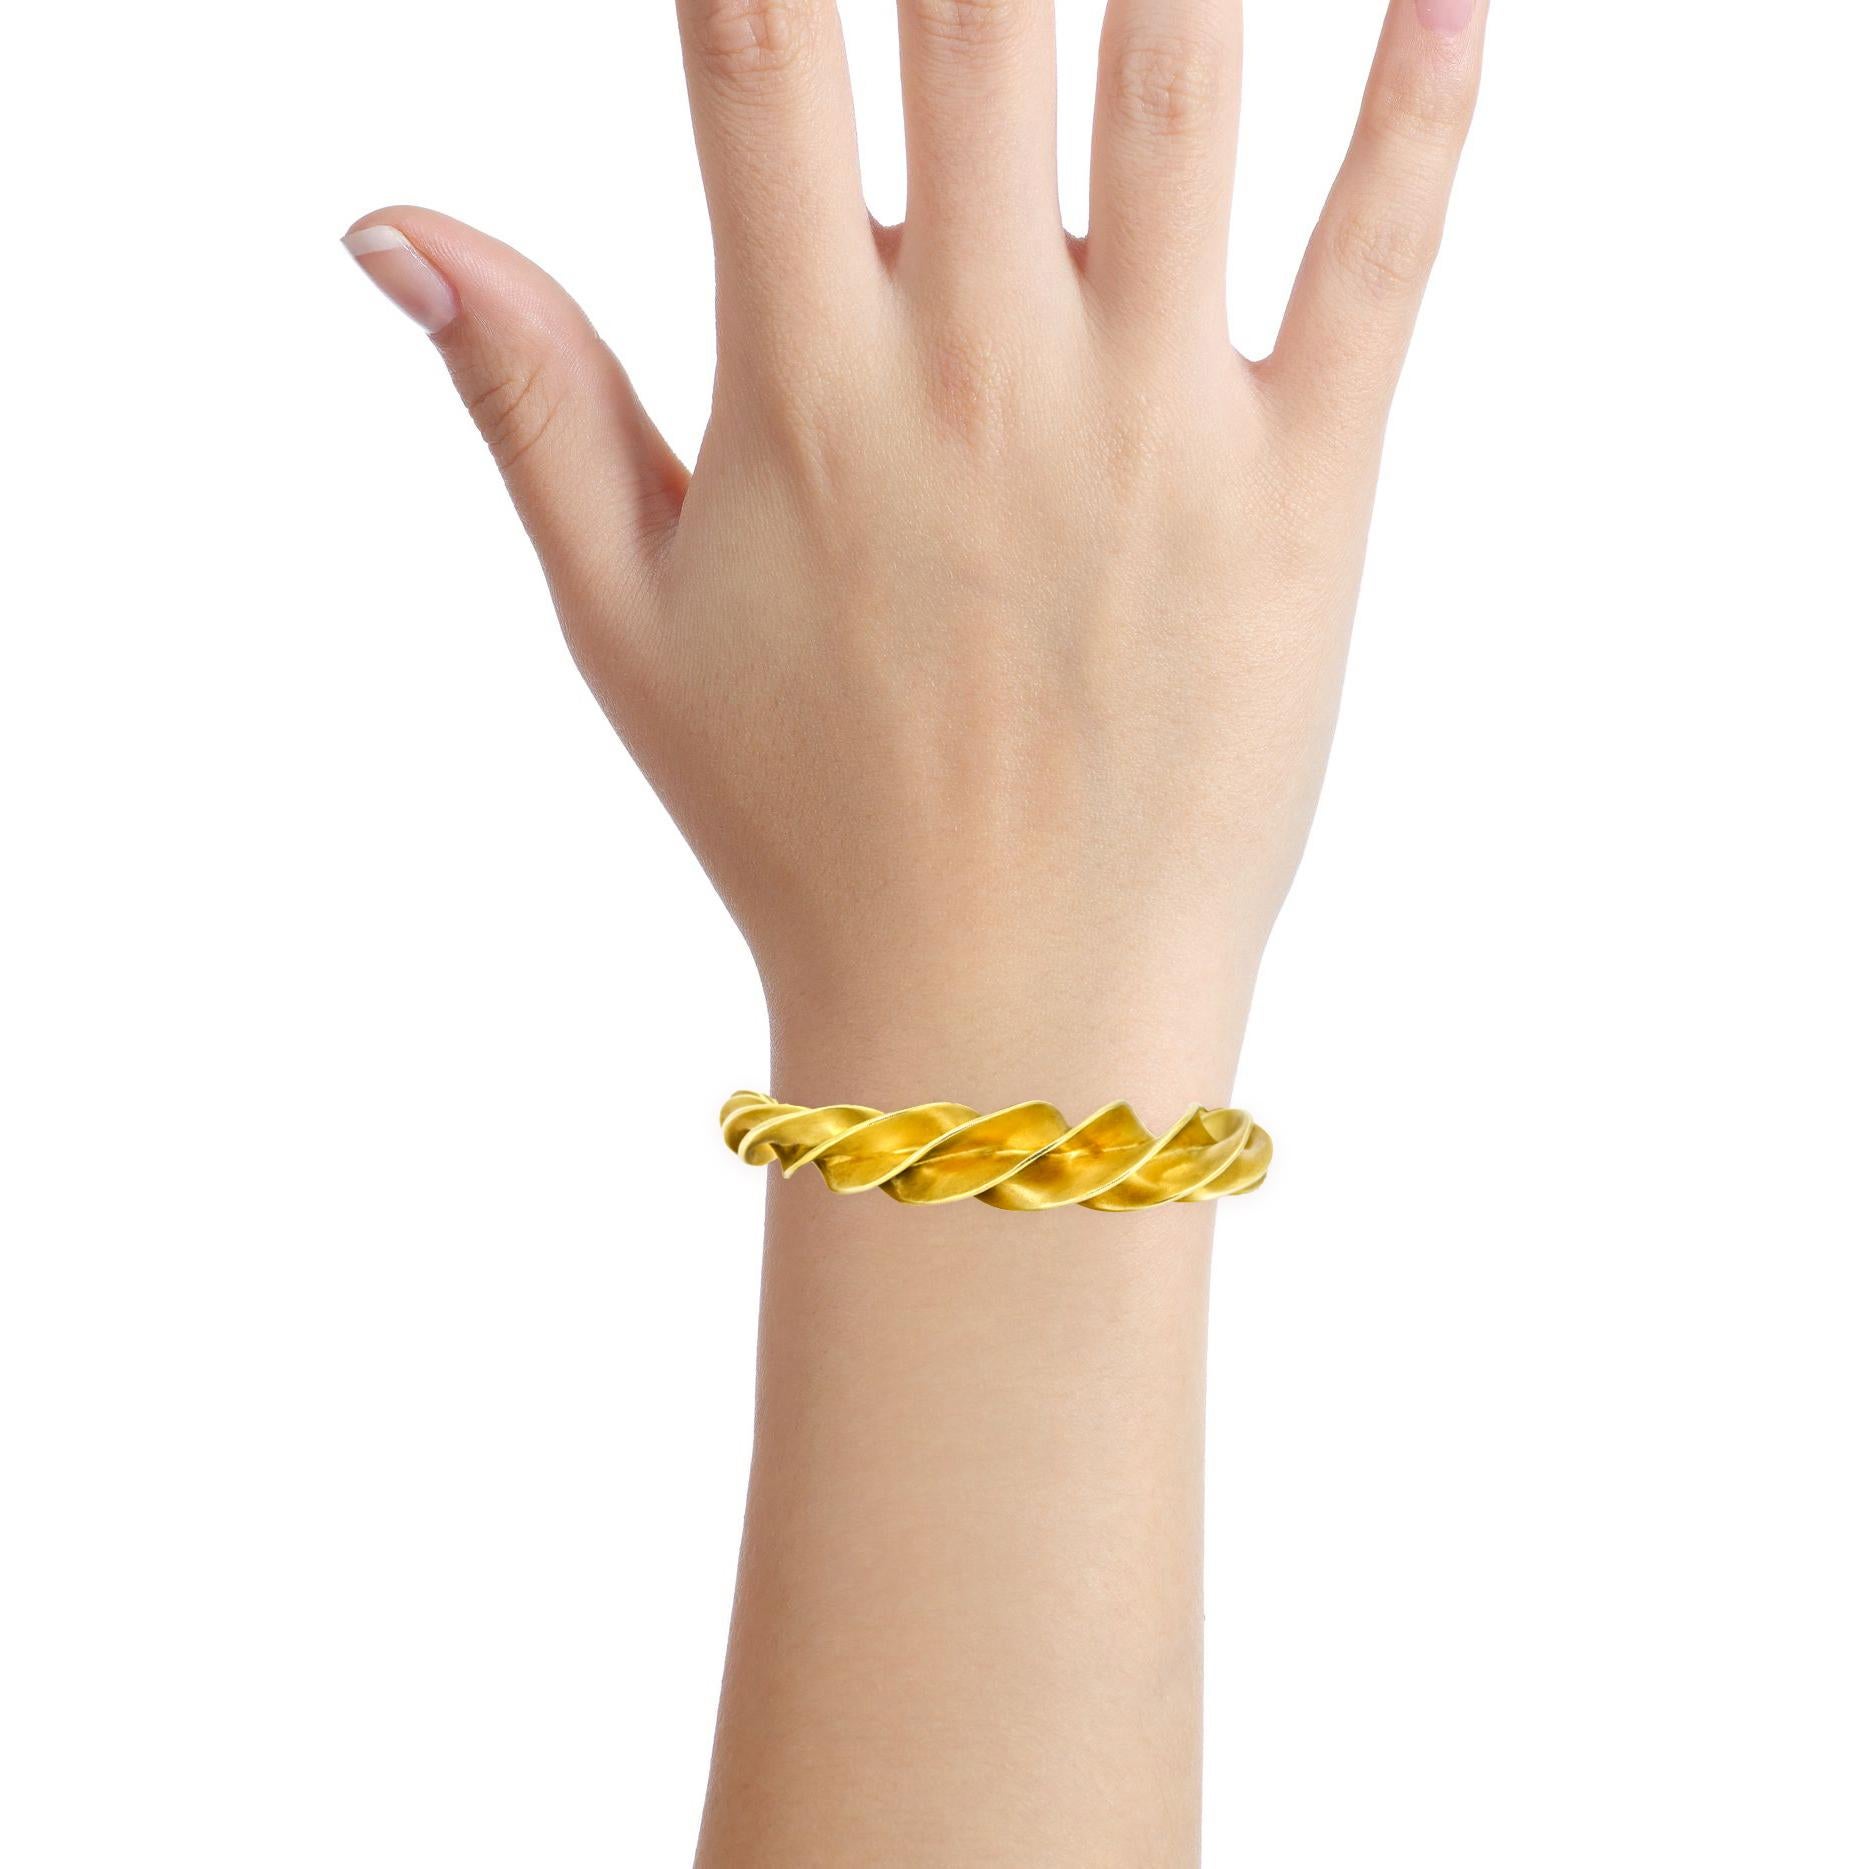 Tiffany & Co. Schlumberger crazy twist bracelet in 18-karat yellow gold. Current style. Retail $13,000. 

Size, Medium (fits a wrist up to 6 inches)
Length, 6.25 inches
Width, 14mm - 7mm
Depth, 14mm
Weight, 58.65 grams 